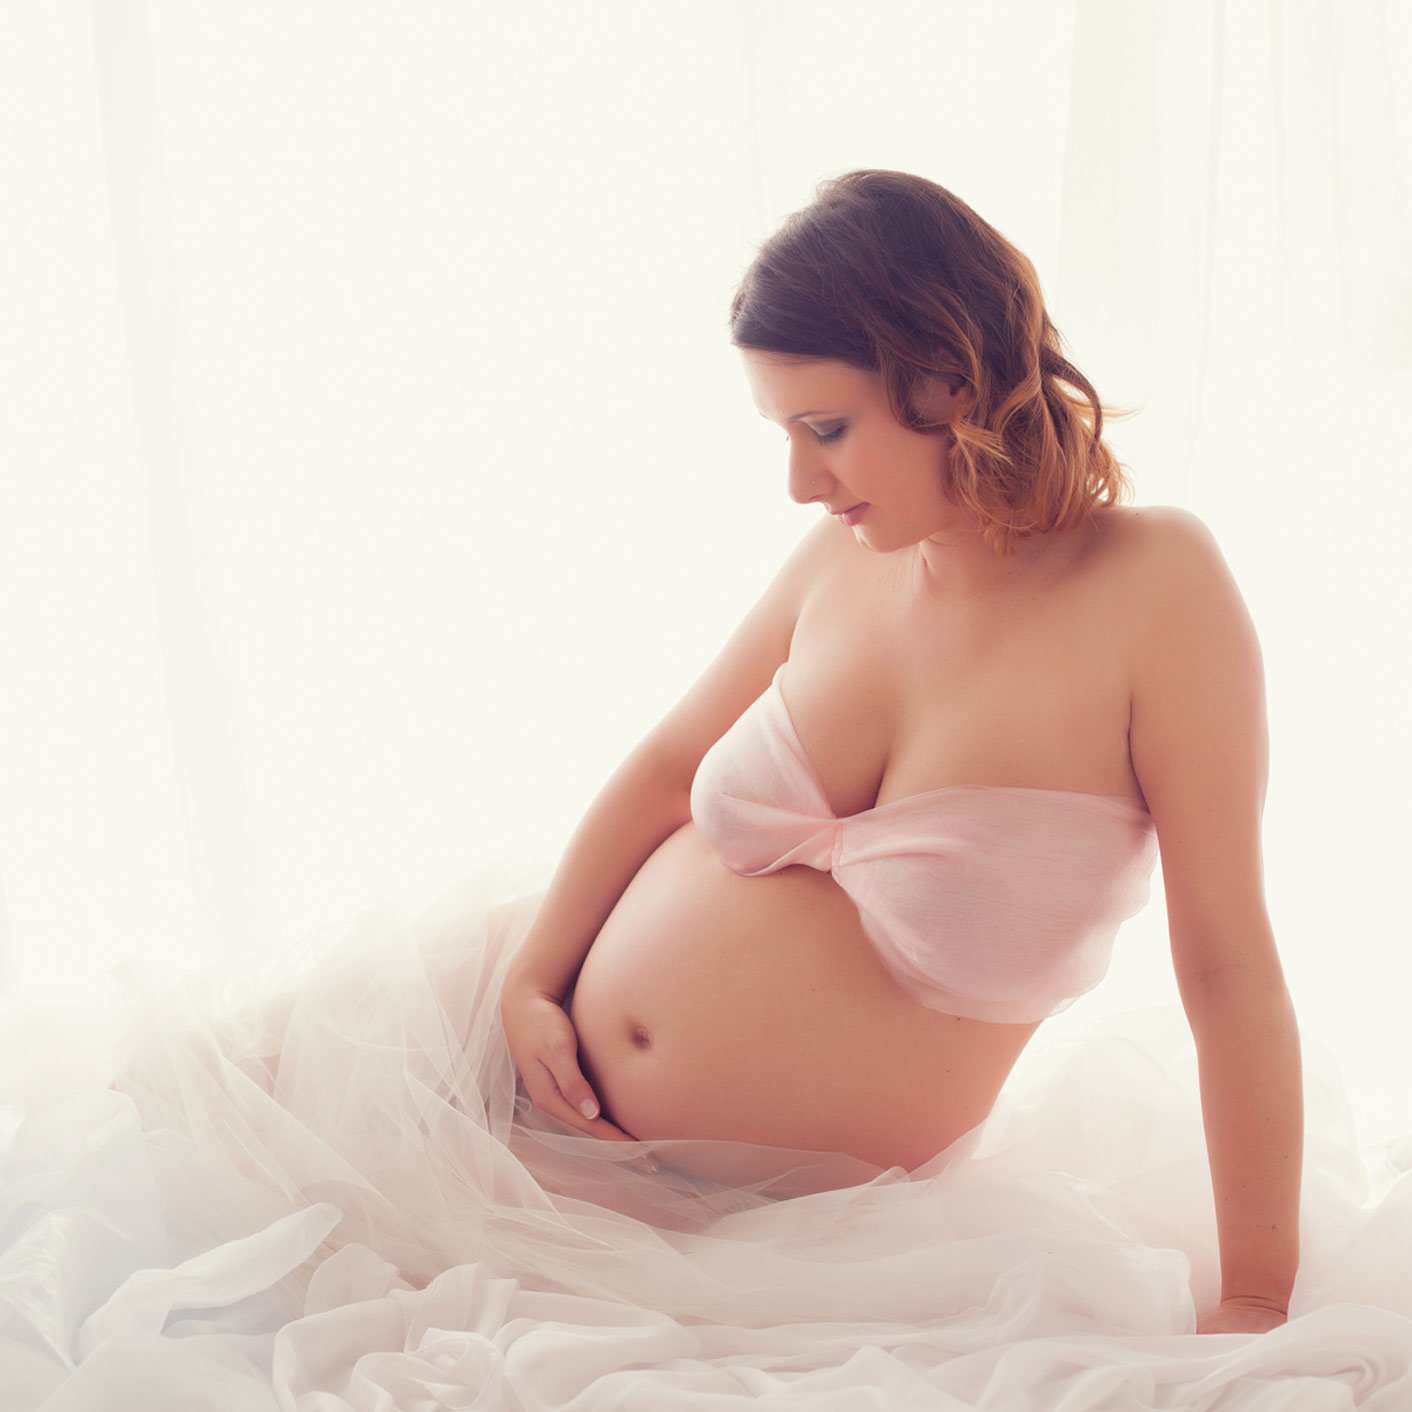 Fine art and Nude artistic pregnancy photos 3